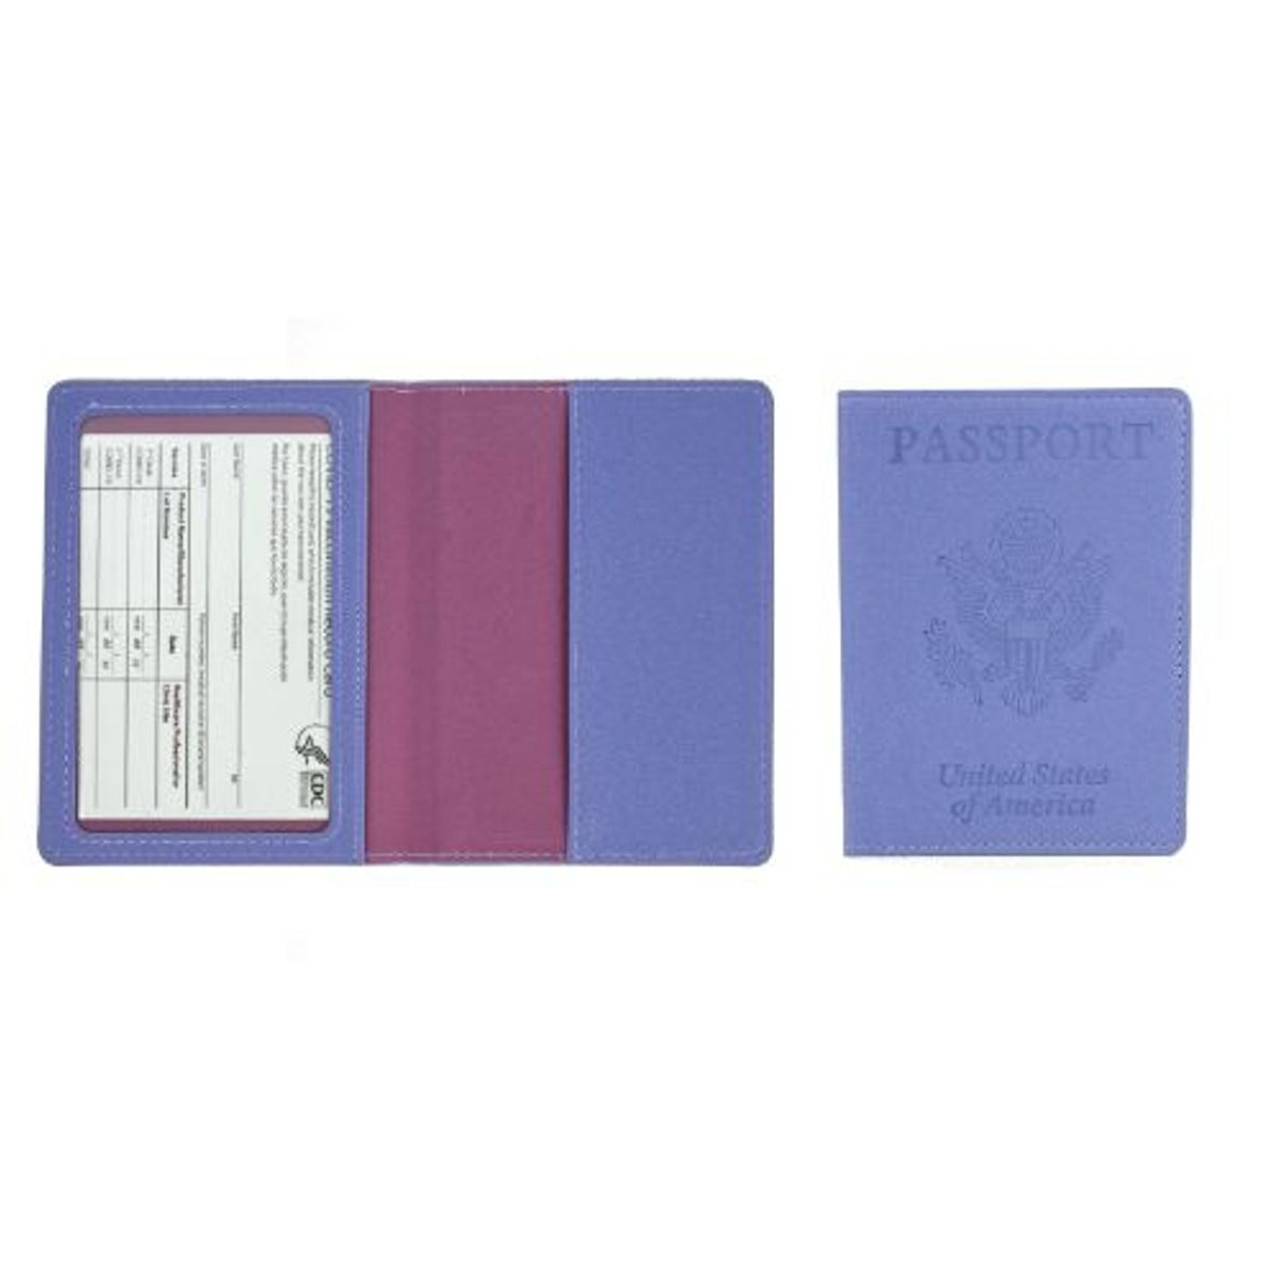 Passport Holder with Vaccination Card Protector  product image